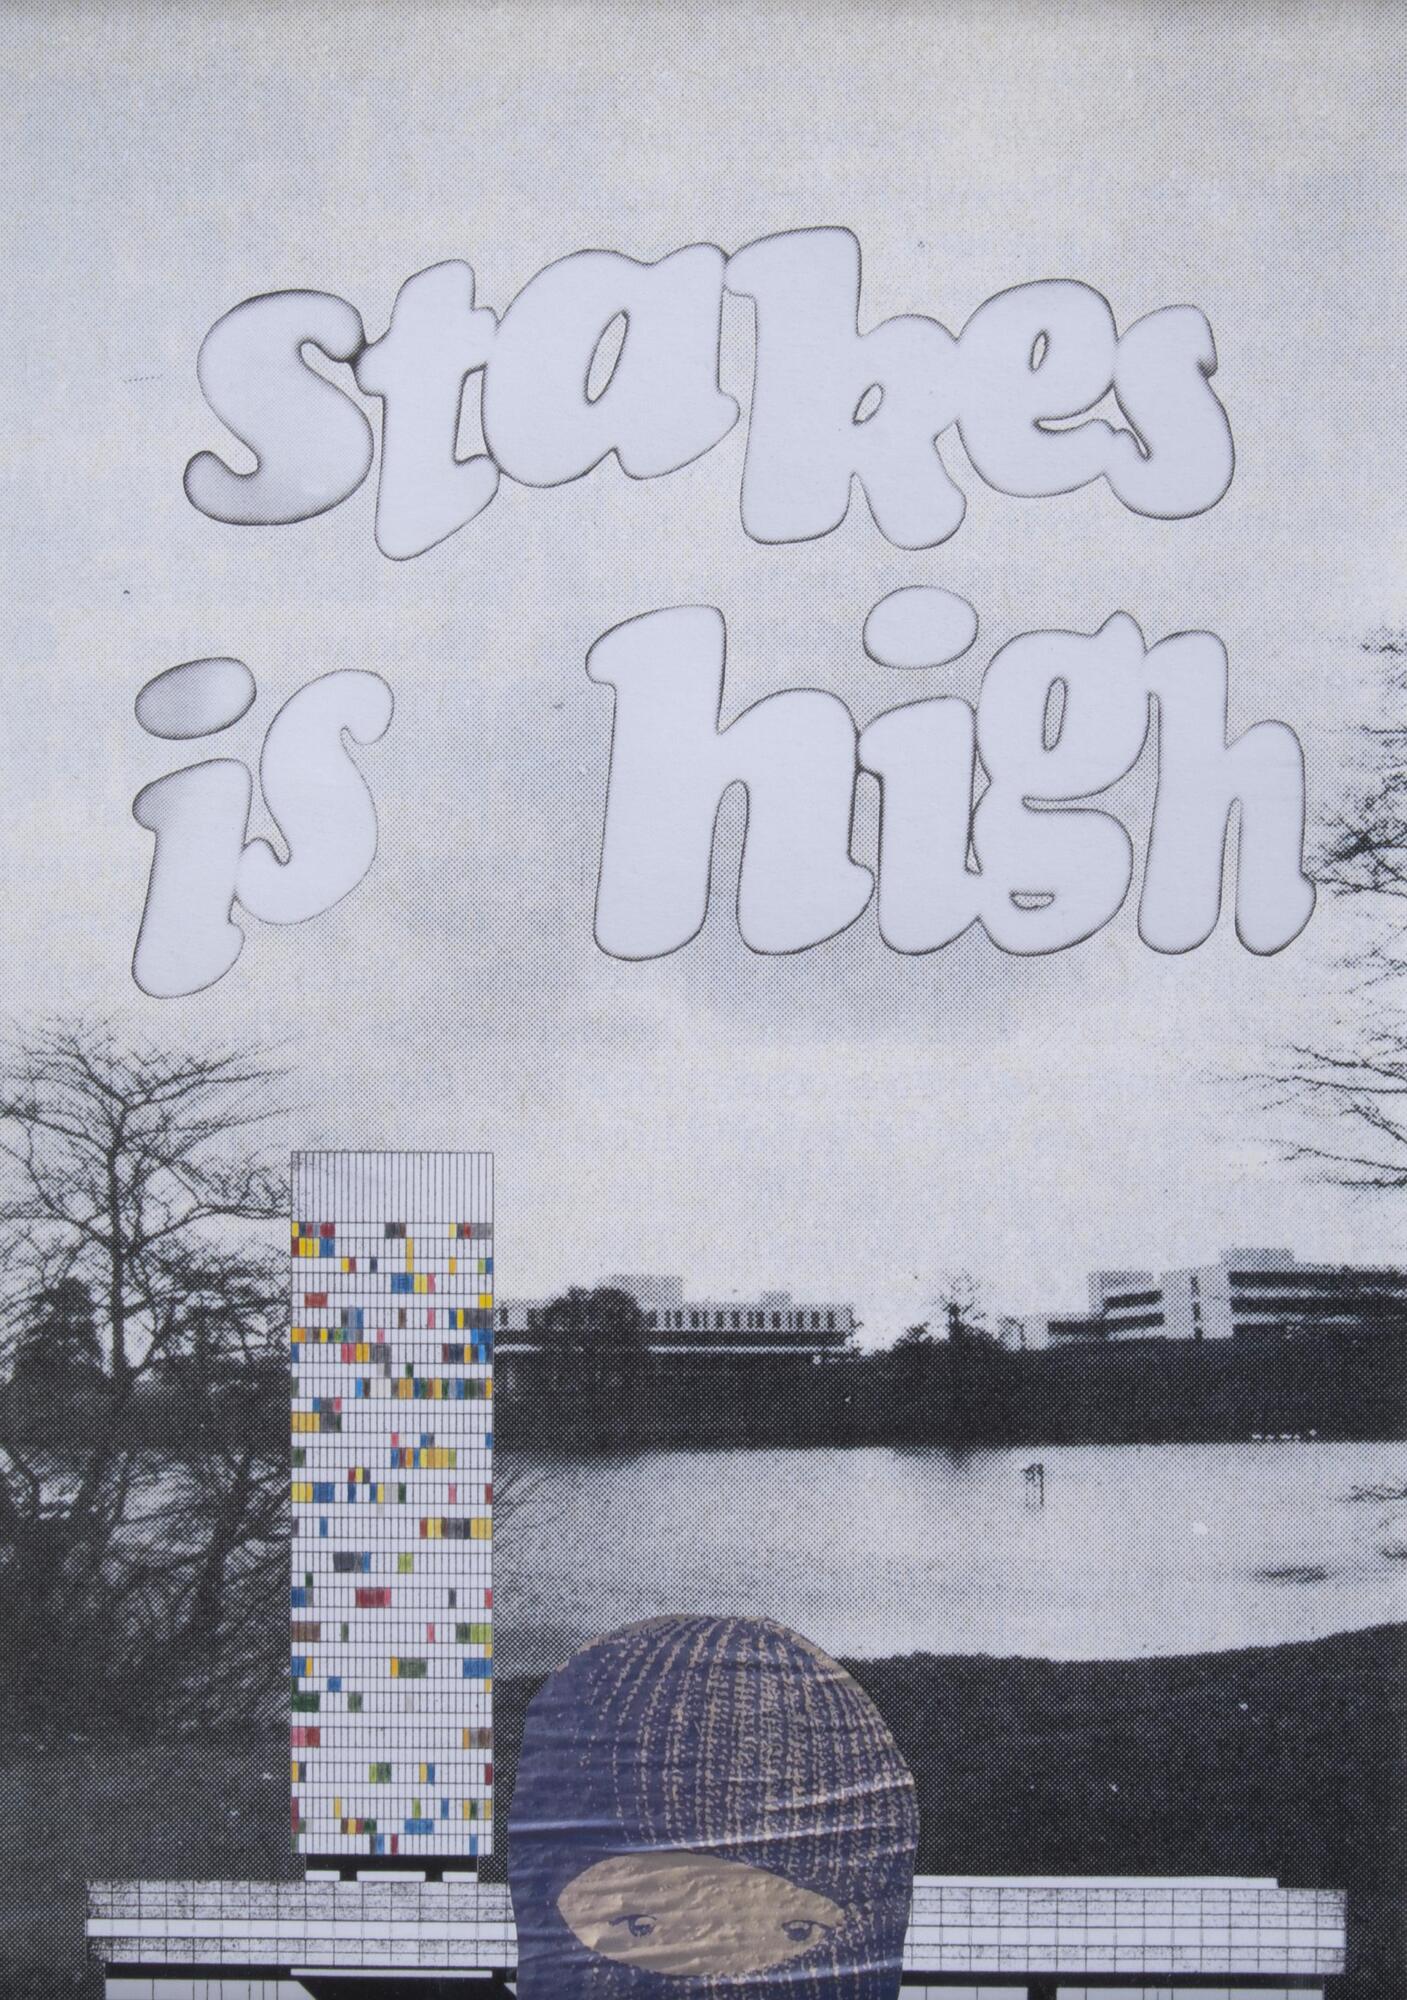 A collage drawing with "Stakes is high" in large bubble letters at the top. The bottom of the drawing is a sparse cityscape and a figure wearing a purple skimask looking at the viewer.